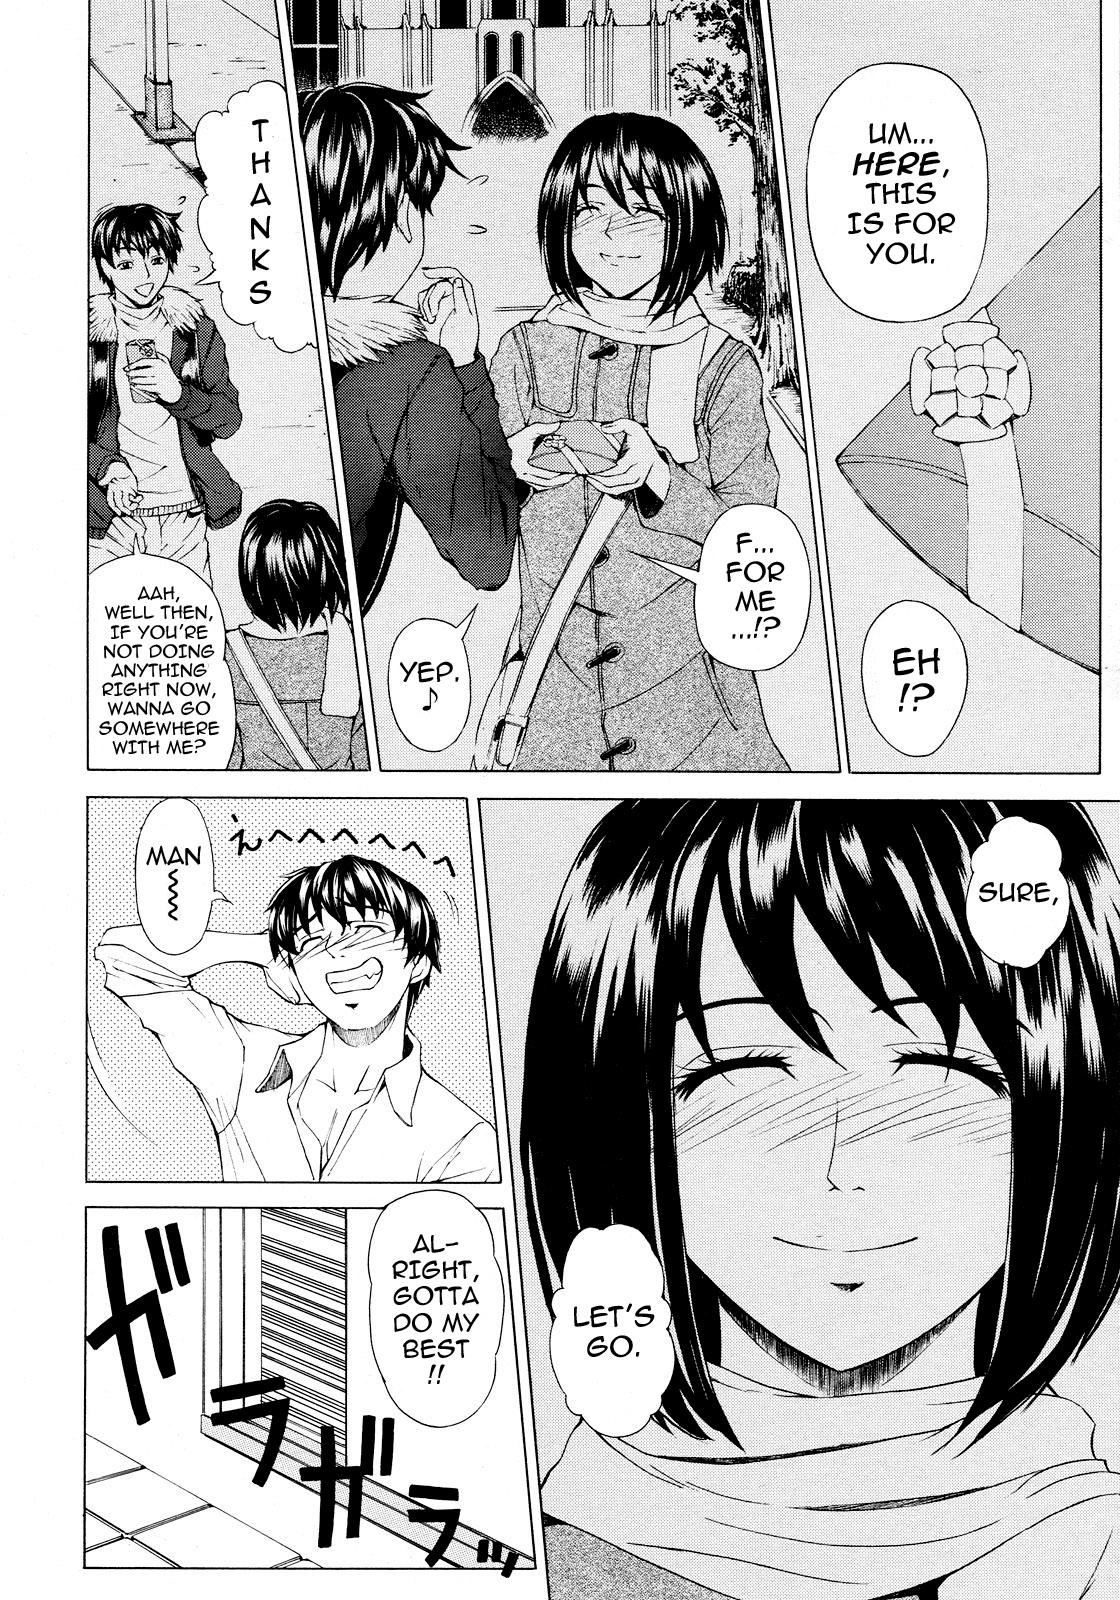 [Hirohito Tokie] Courtship Vector Ch 1-2 [ENG] [刻江尋人] 求愛ベクトル [英語]